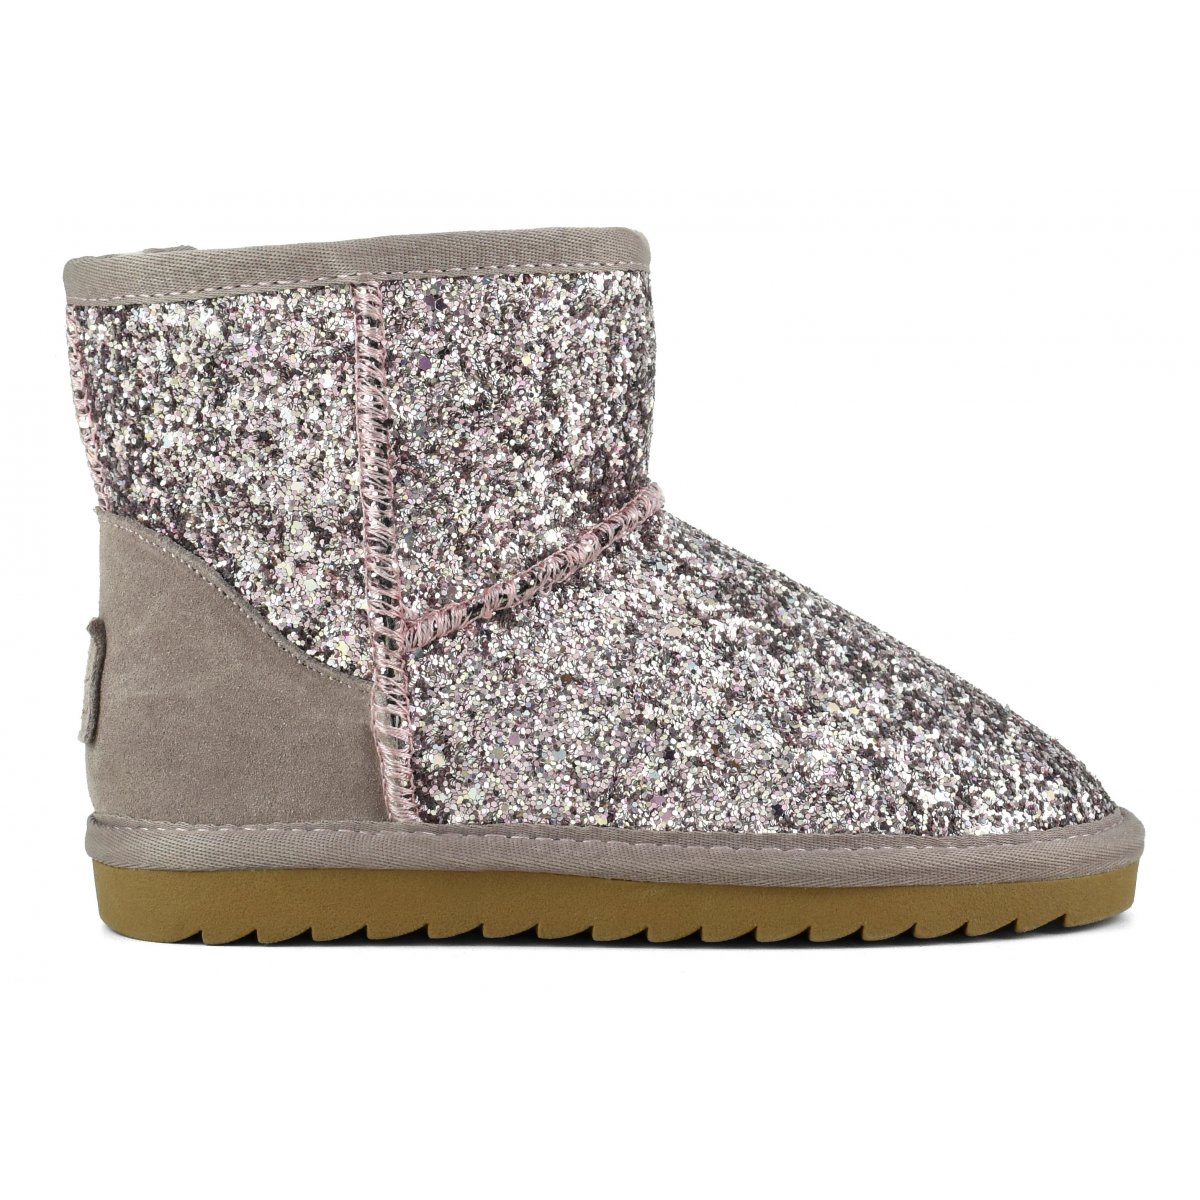 Glittered winter boot with wool lining - Winter Boots Kid Colors of ...